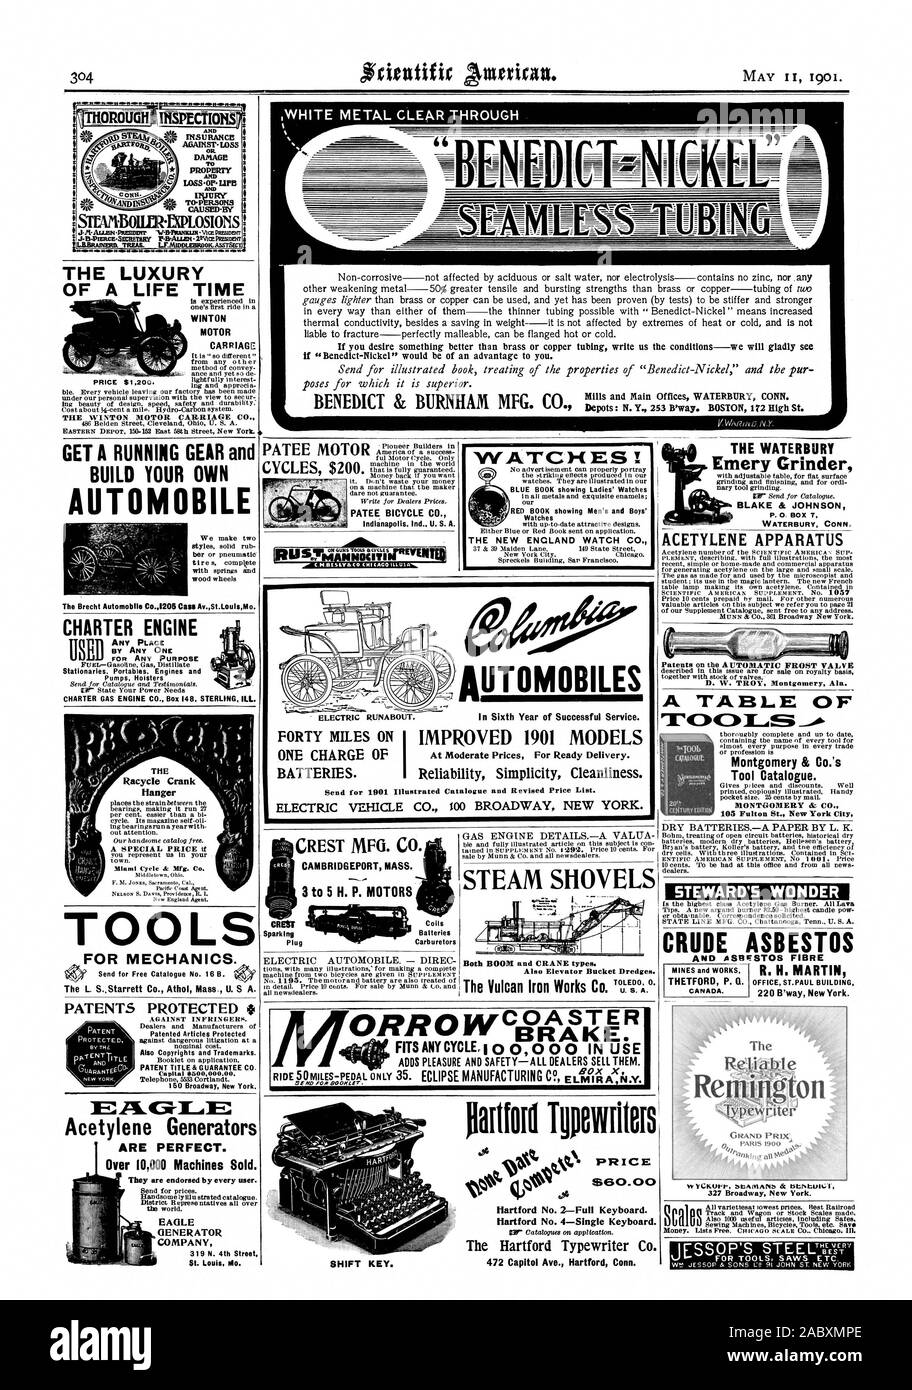 Track and Wagon or Stock Scales made. Also 1000 useful articles including Safes Sewing Machines Bicycles Tools. etc. Save T ENTIFIC AMERICAN SUPPLEMENT No 1 01)1. Price 10 cents. To be had at this office and from all news dealers., scientific american, 1901-05-11 Stock Photo